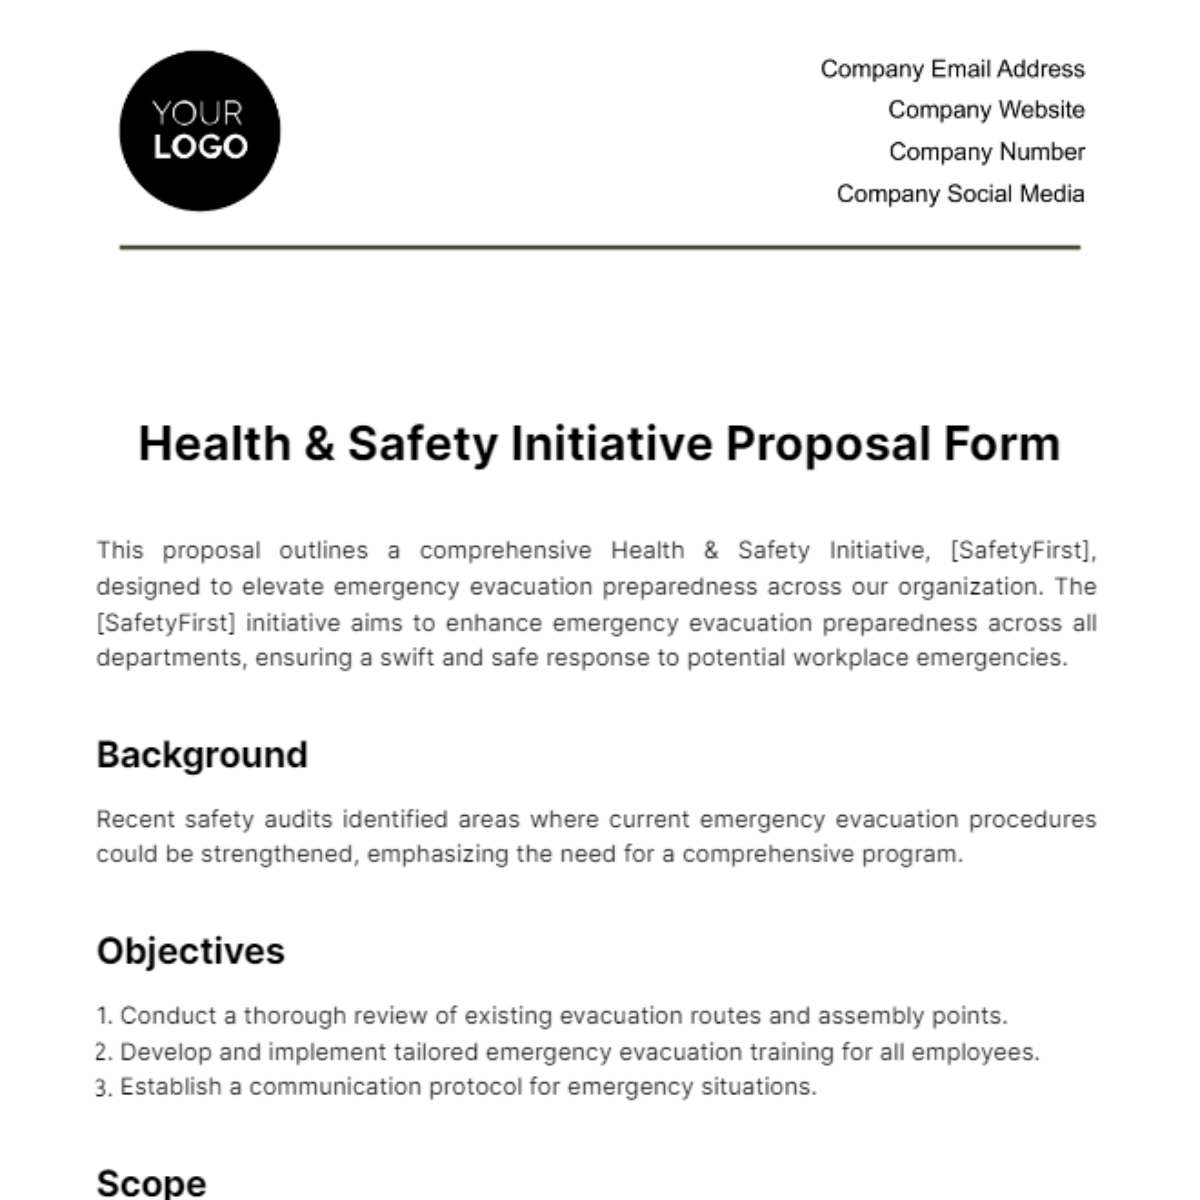 Health & Safety Initiative Proposal Form Template